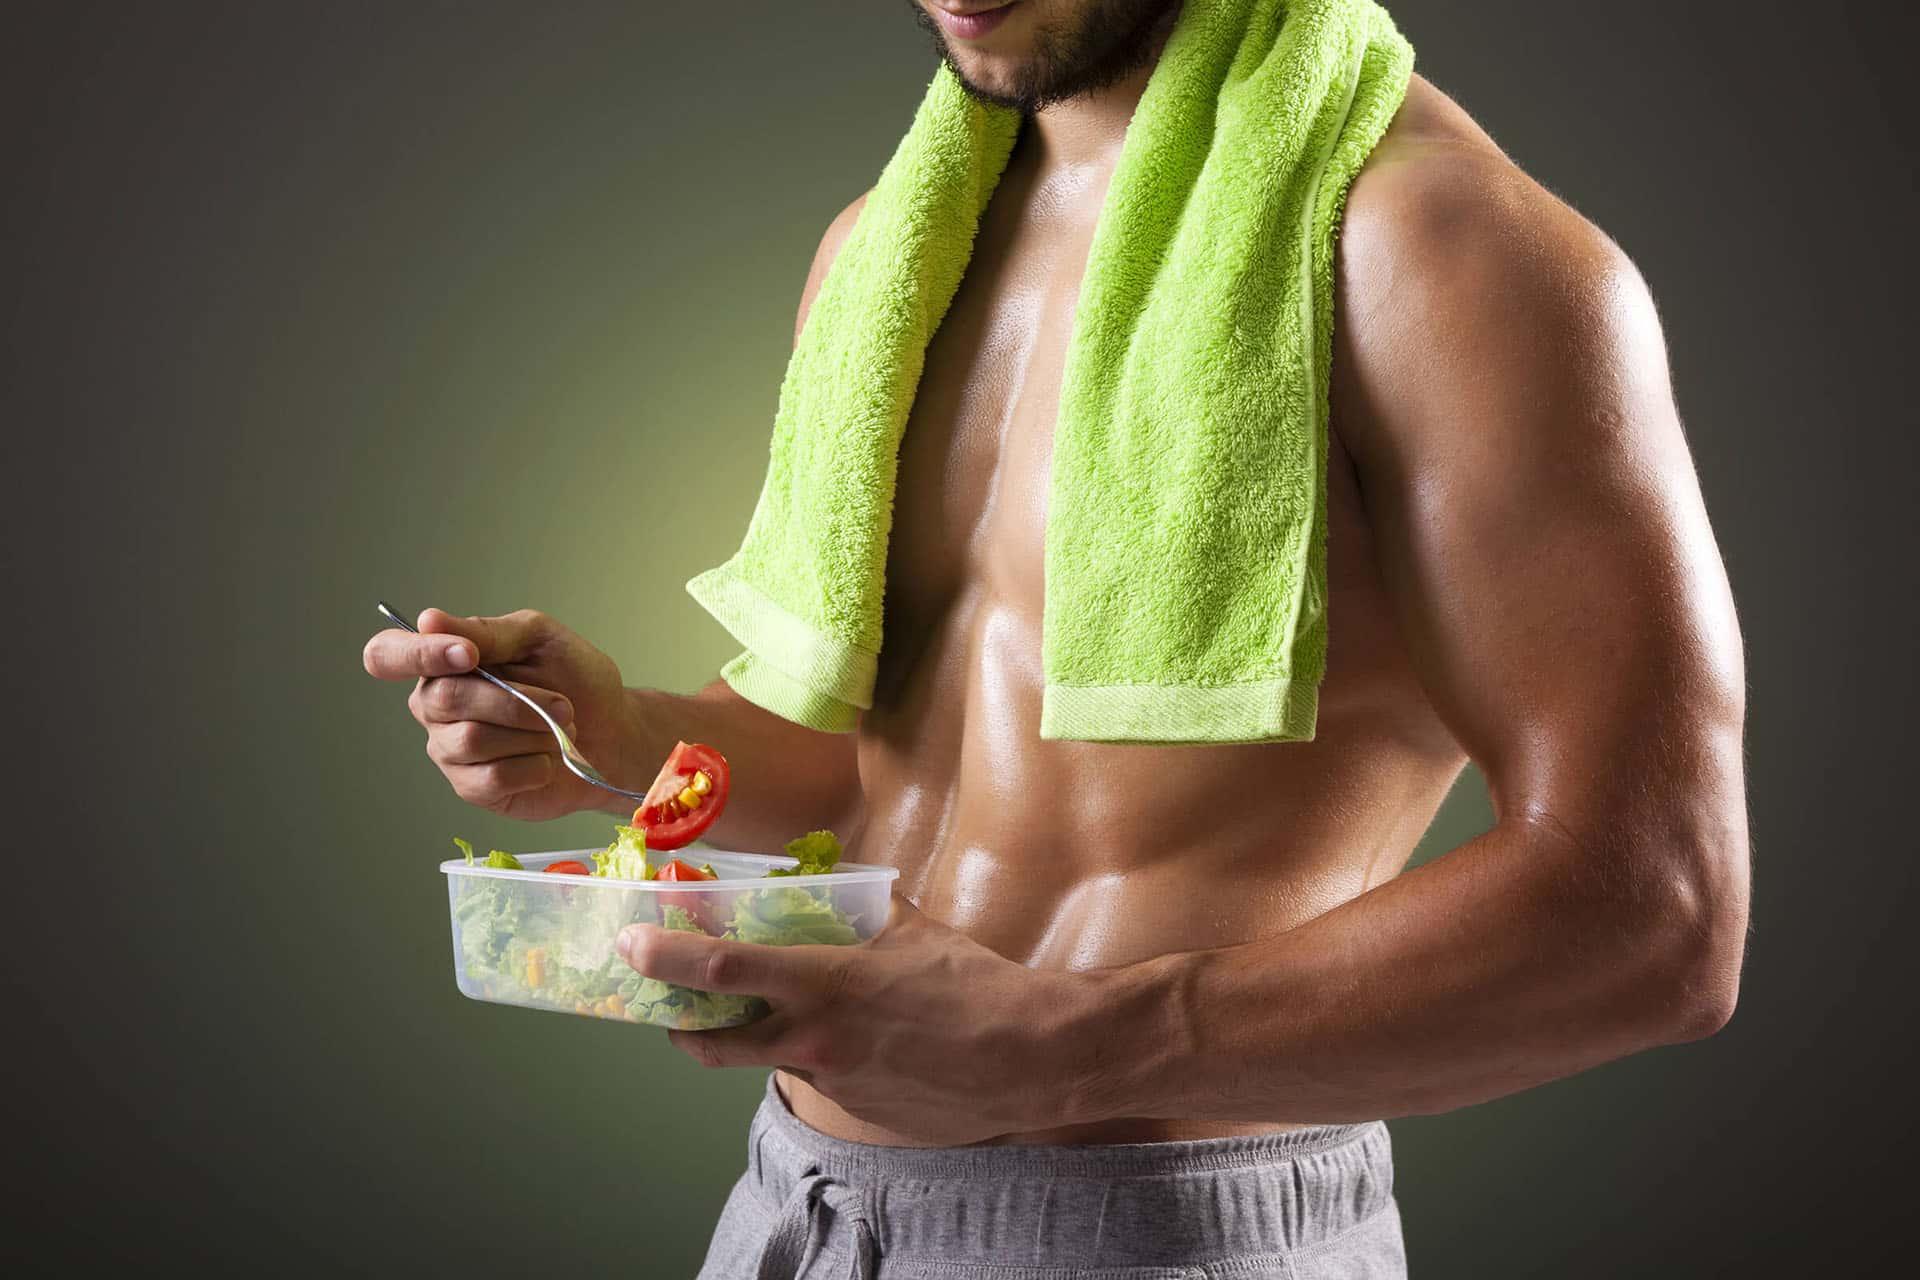 Fit male eating salad over green background